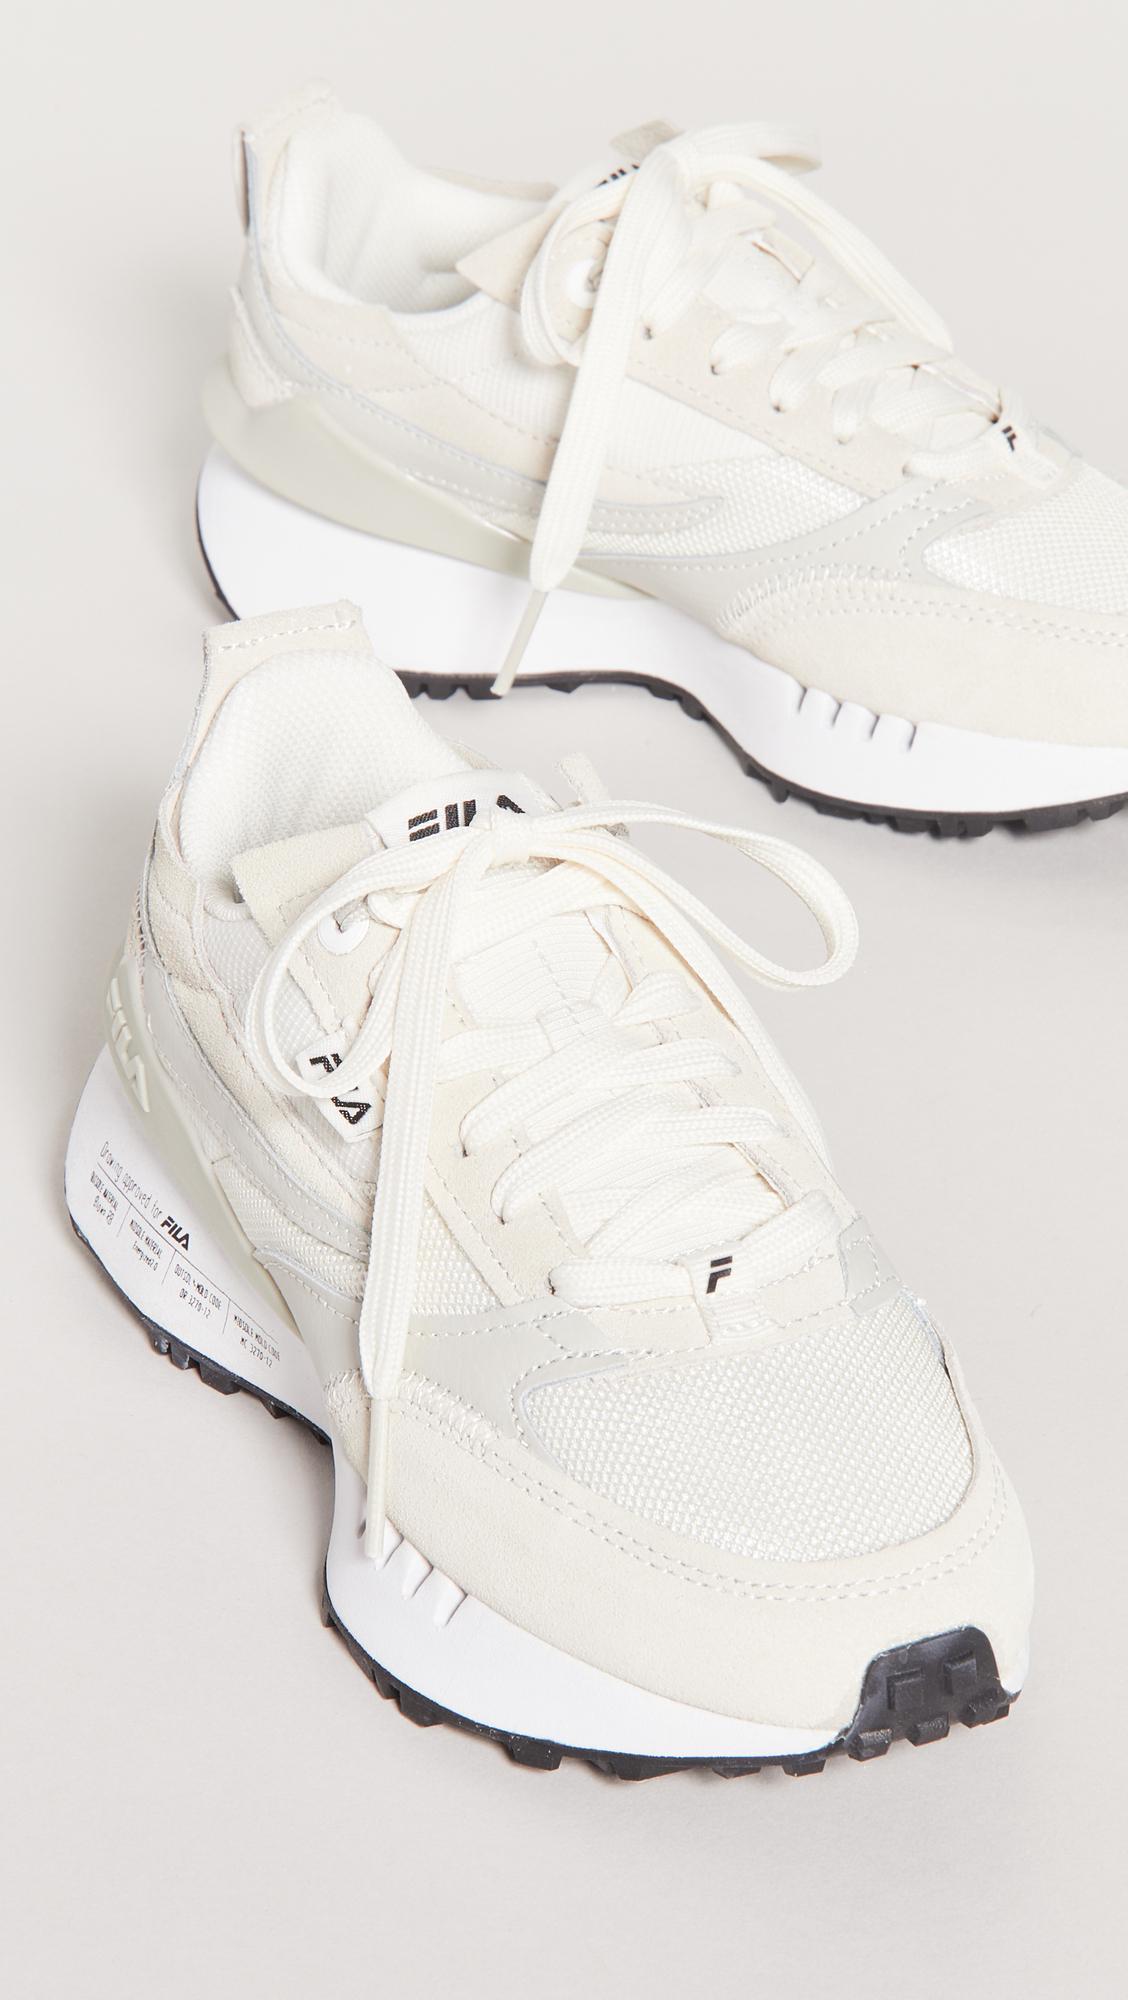 Fila Leather Renno N Generation Sneakers in White - Lyst